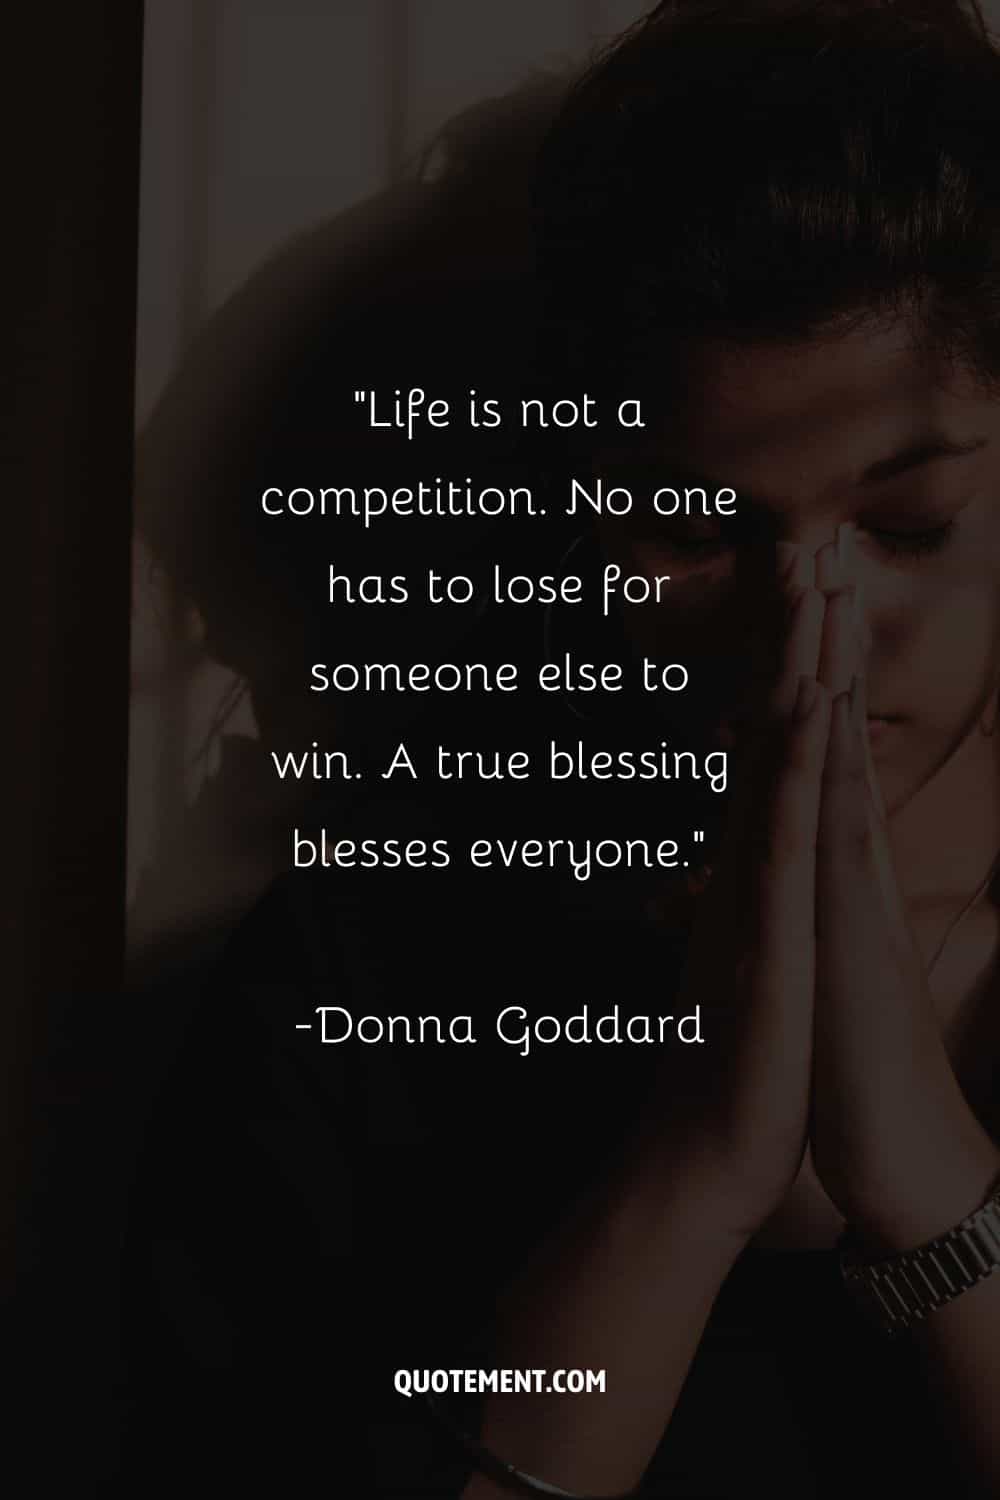 “Life is not a competition. No one has to lose for someone else to win. A true blessing blesses everyone.”